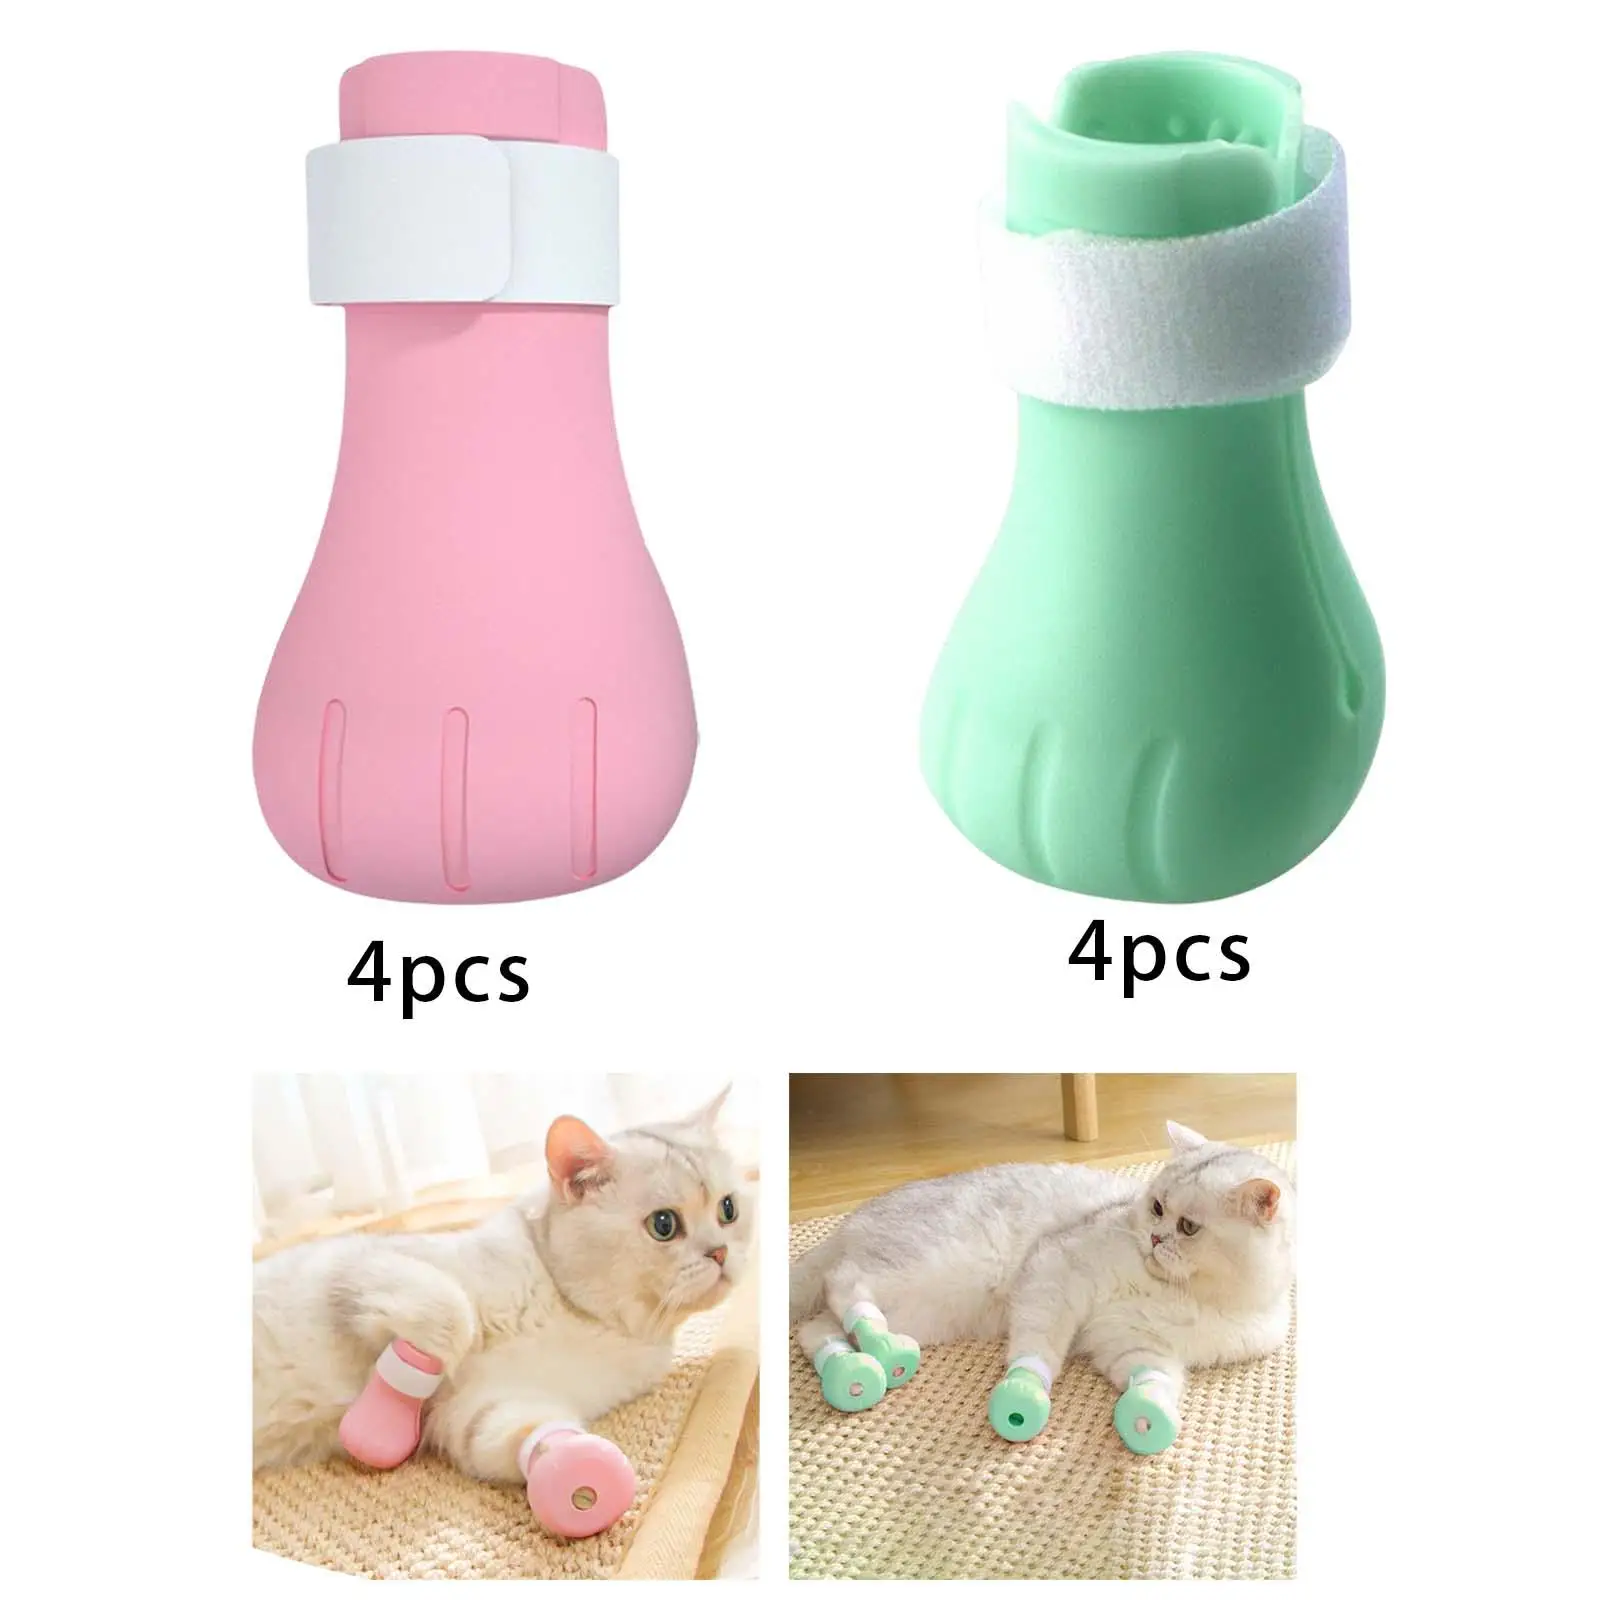 4Pieces Anti Scratch Cat Shoes Silicone Boots Cover, Silicone Gloves for Cat Claw, Used for Pet Grooming